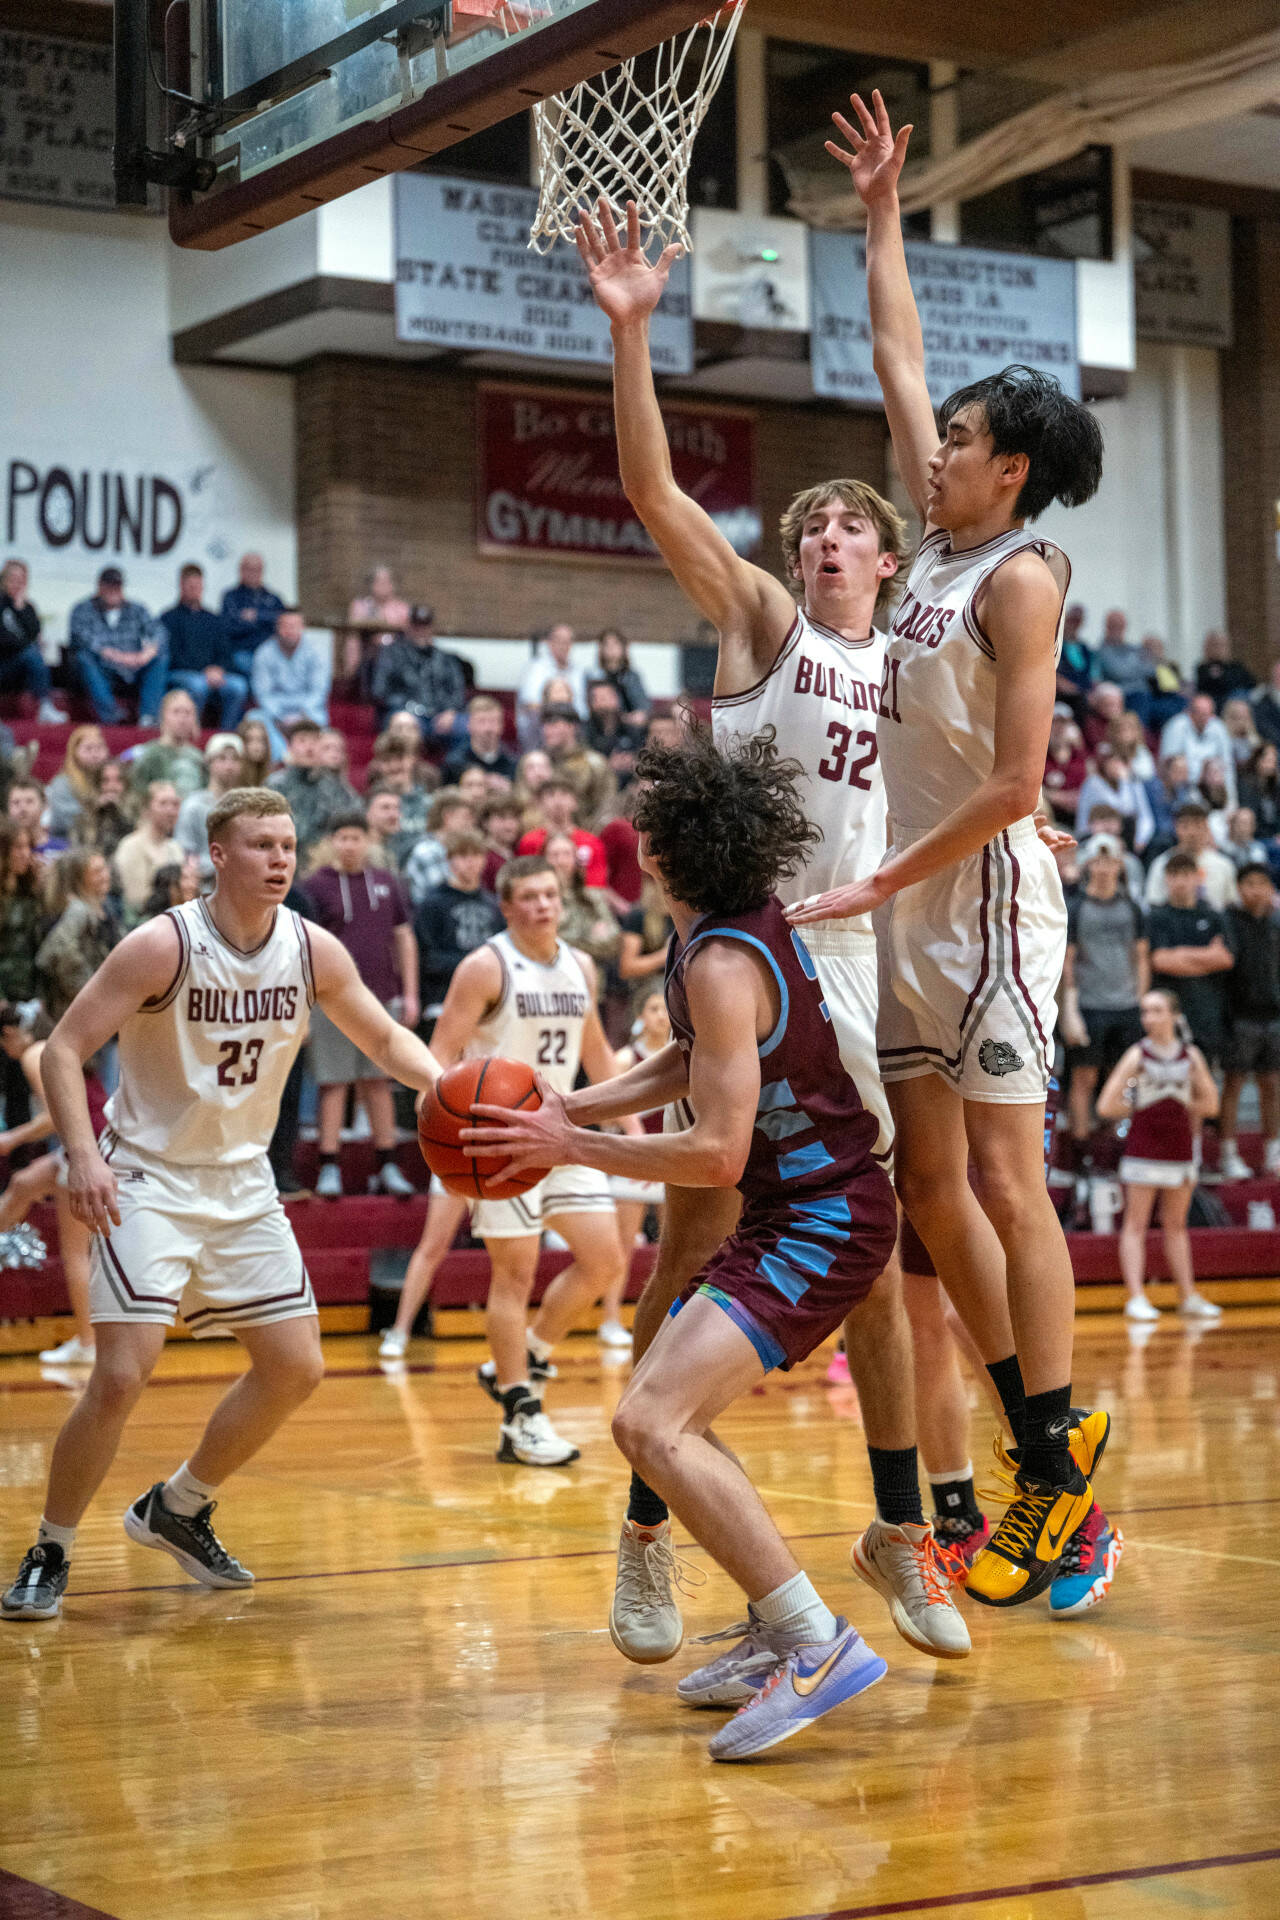 PHOTO BY FOREST WORGUM Montesano’s Soren Cobb (32) and Delon Chan, right, defend against Stevenson’s Seth Green during the Bulldogs’ 75-58 win in a 1A District 4 Tournament game on Wednesday in Montesano.